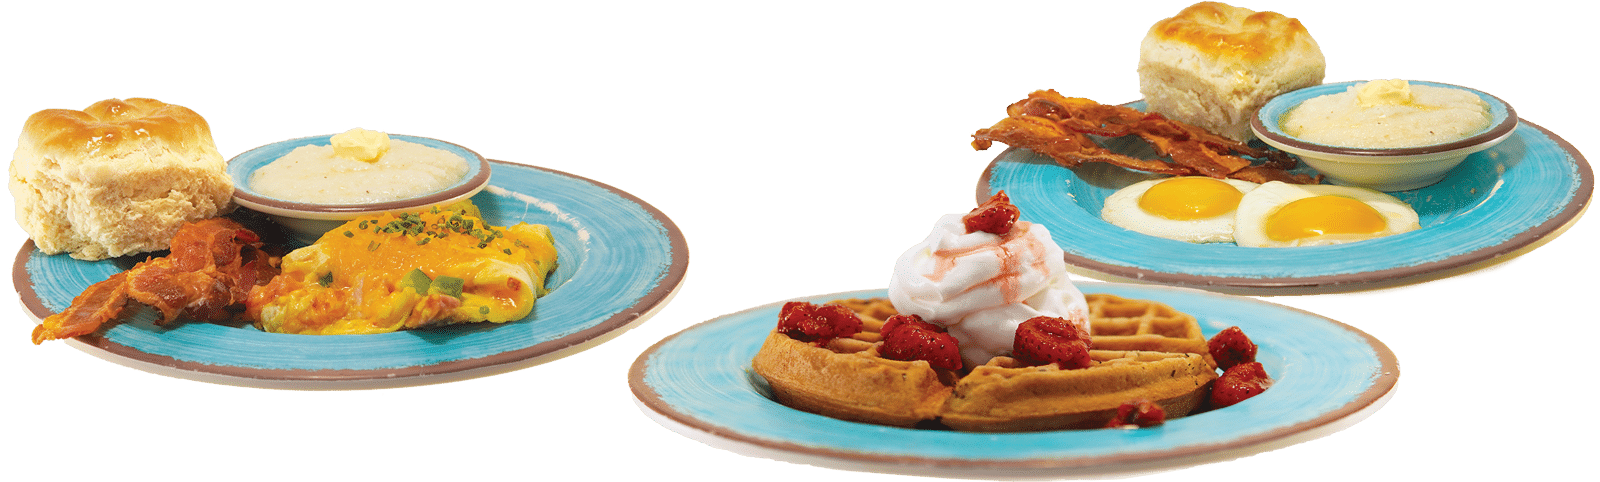 Eggs, Waffles and More Breakfast -McDavid's Cafe Southern Cuisine